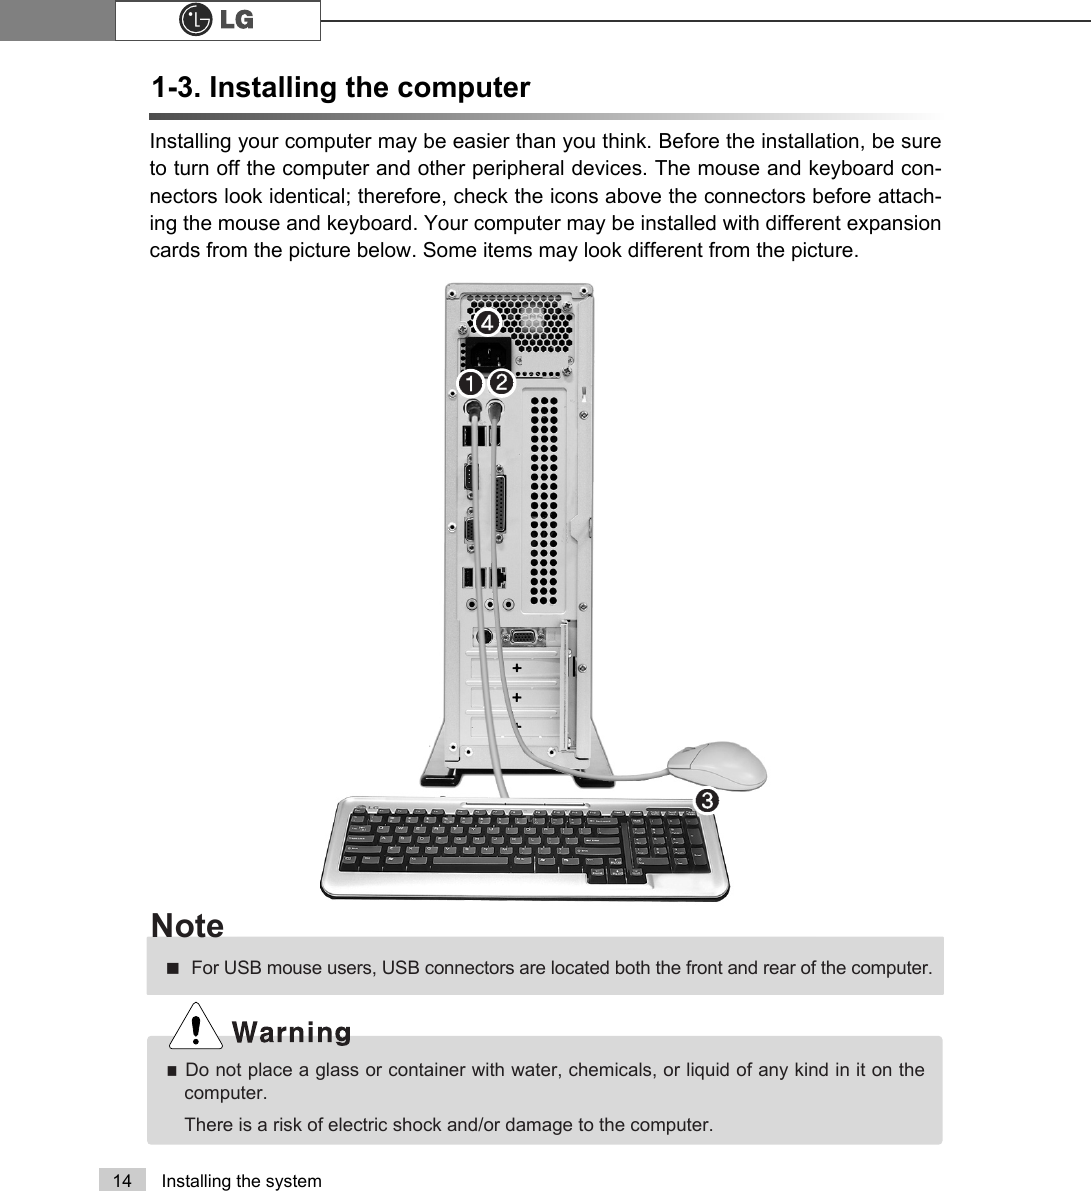 14 Installing the system1-3. Installing the computerInstalling your computer may be easier than you think. Before the installation, be sureto turn off the computer and other peripheral devices. The mouse and keyboard con-nectors look identical; therefore, check the icons above the connectors before attach-ing the mouse and keyboard. Your computer may be installed with different expansioncards from the picture below. Some items may look different from the picture.ãDo not place a glass or container with water, chemicals, or liquid of any kind in it on thecomputer.There is a risk of electric shock and/or damage to the computer.ãFor USB mouse users, USB connectors are located both the front and rear of the computer.Note℘ℙℚℛ